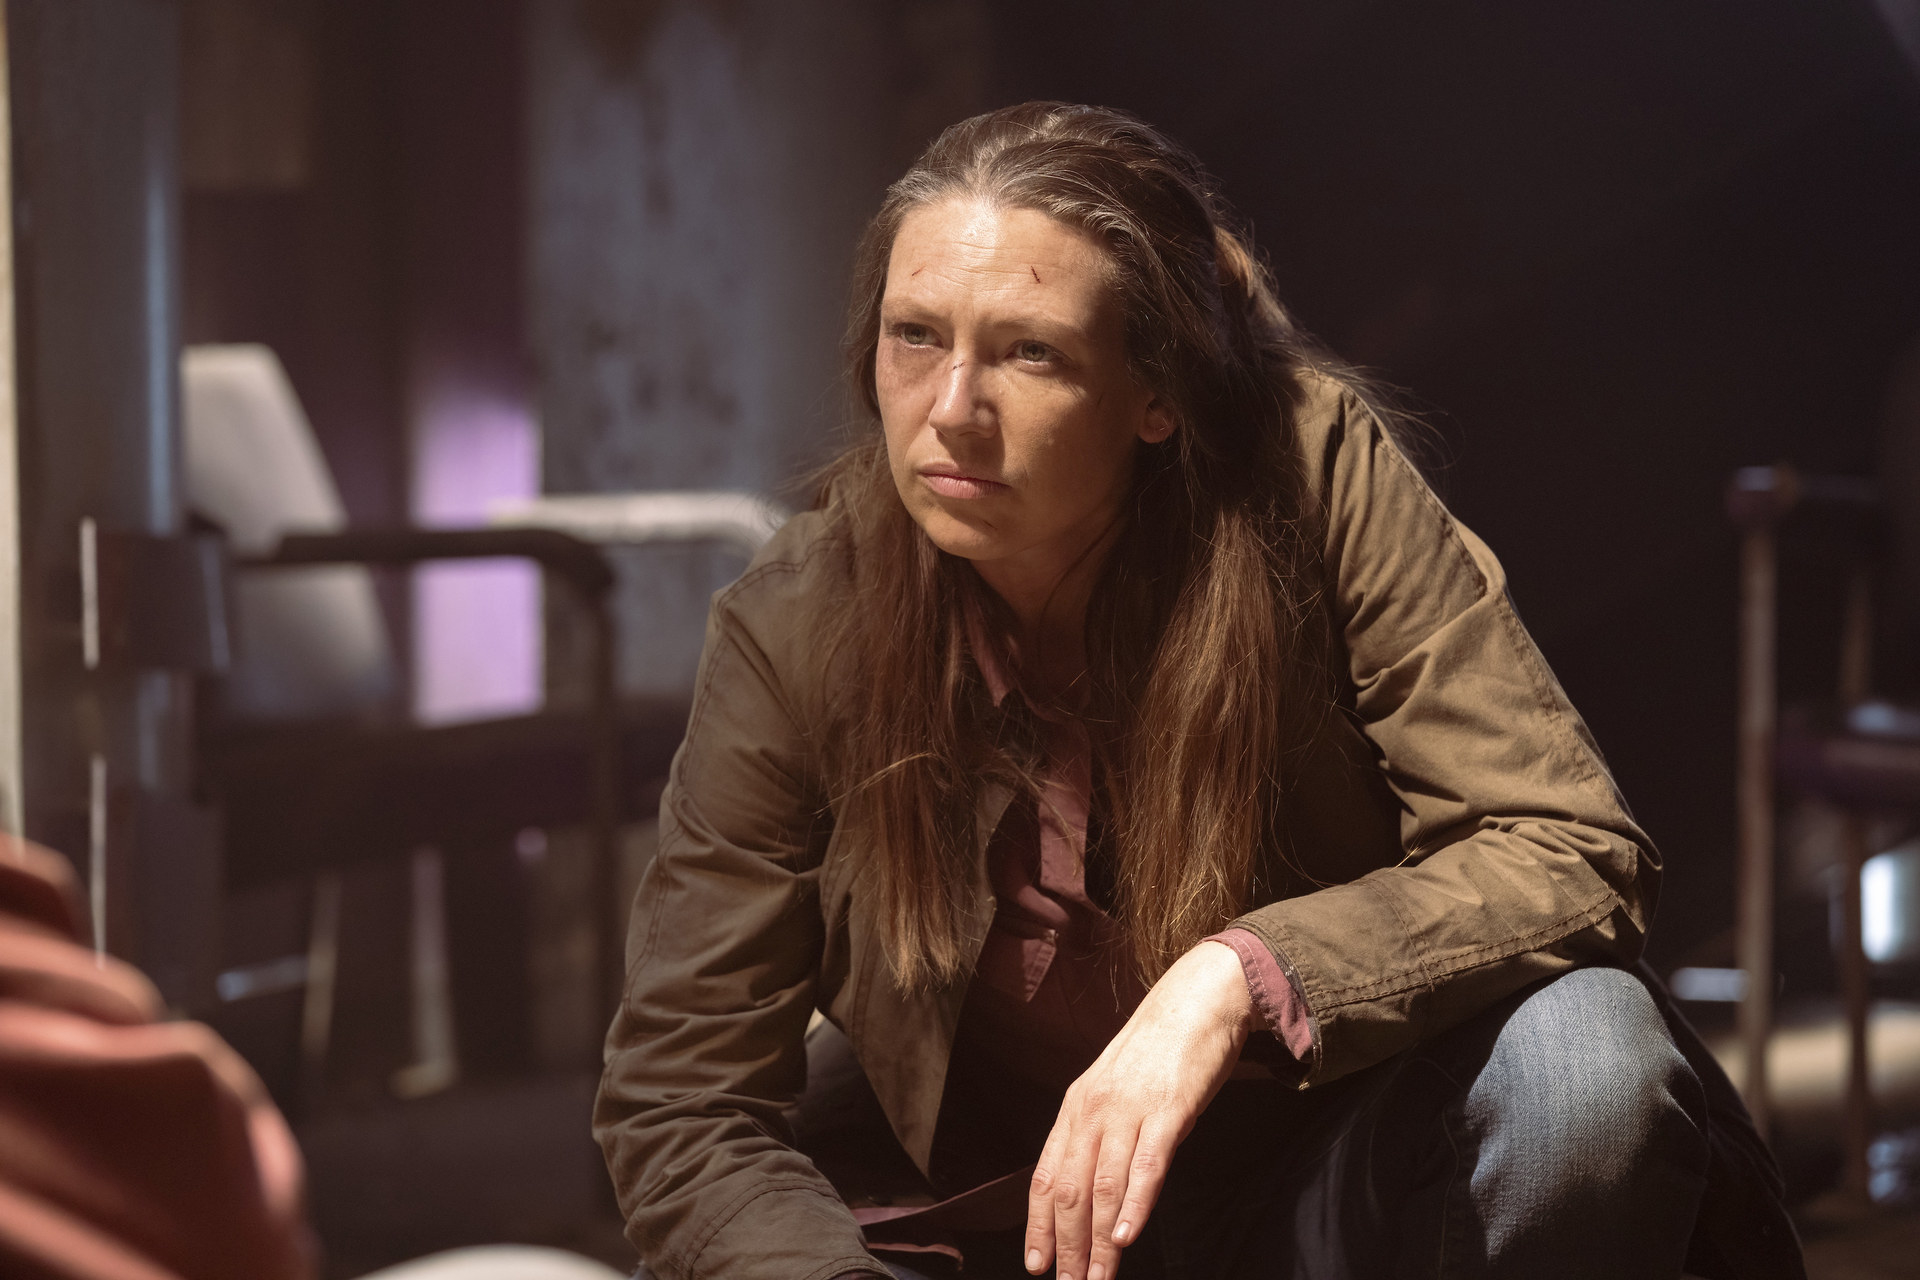 Anna Torv as Tess from The Last of Us